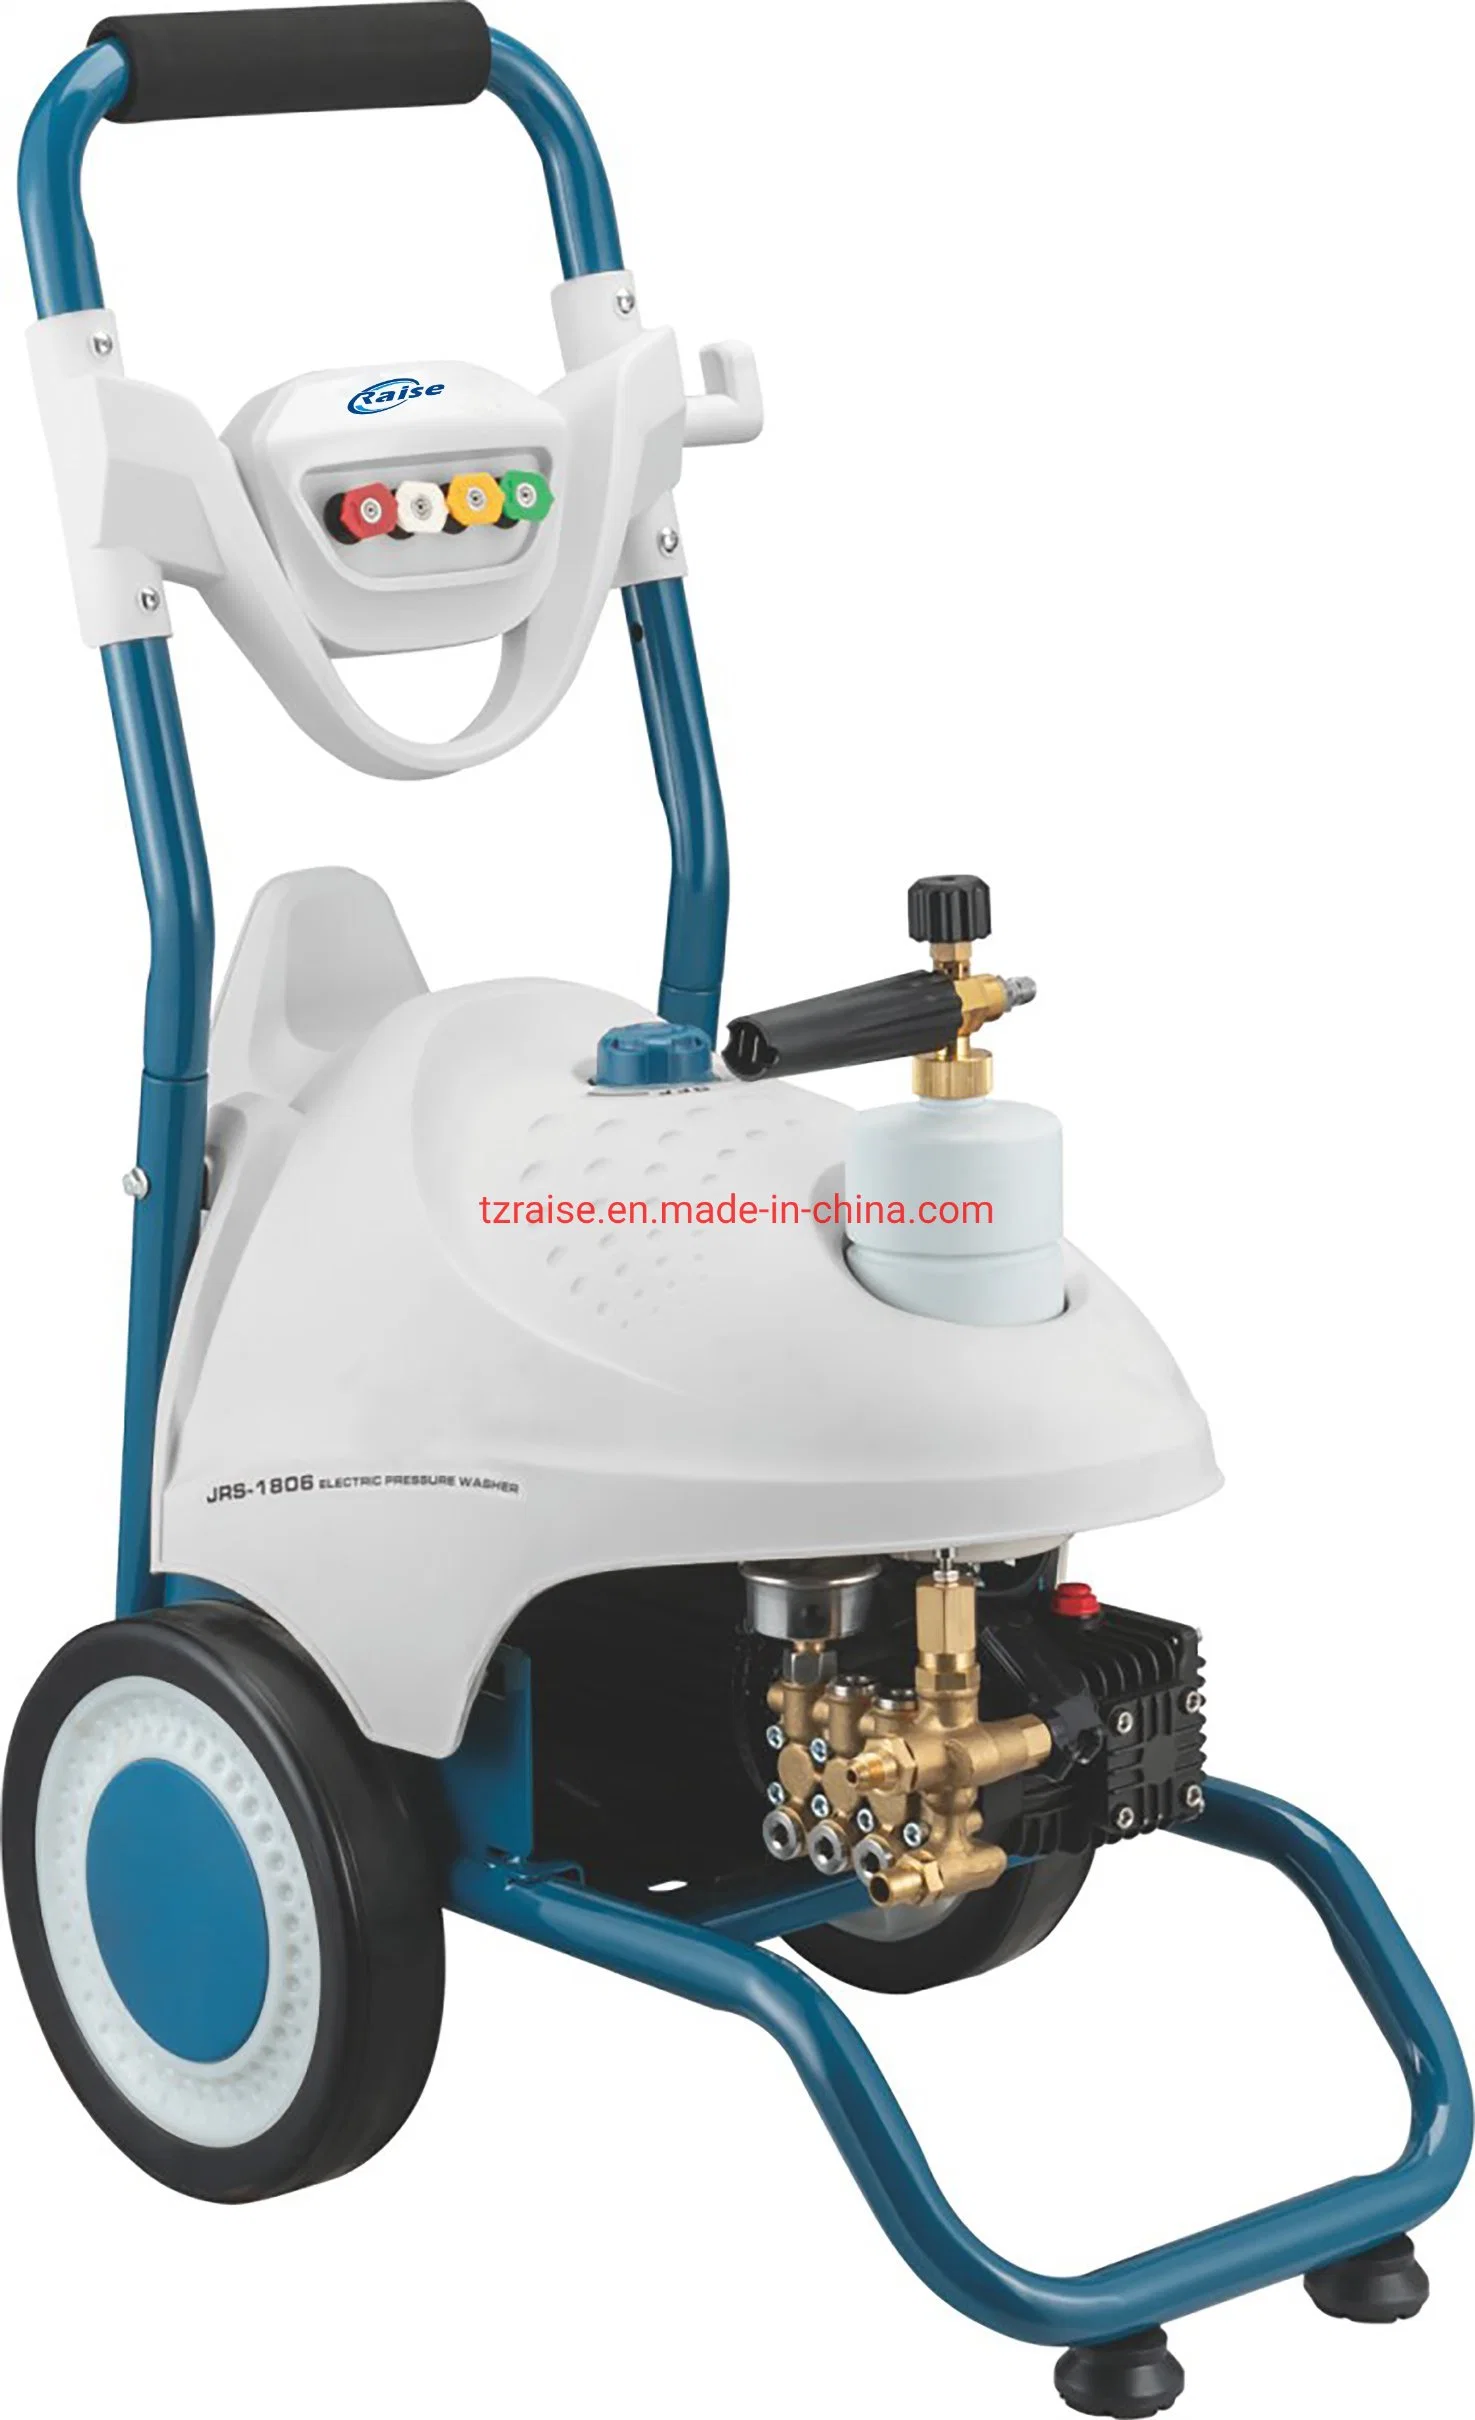 New Model 2.5kw Electric High Pressure Washer Car Washer Cleaning Machine 130bar